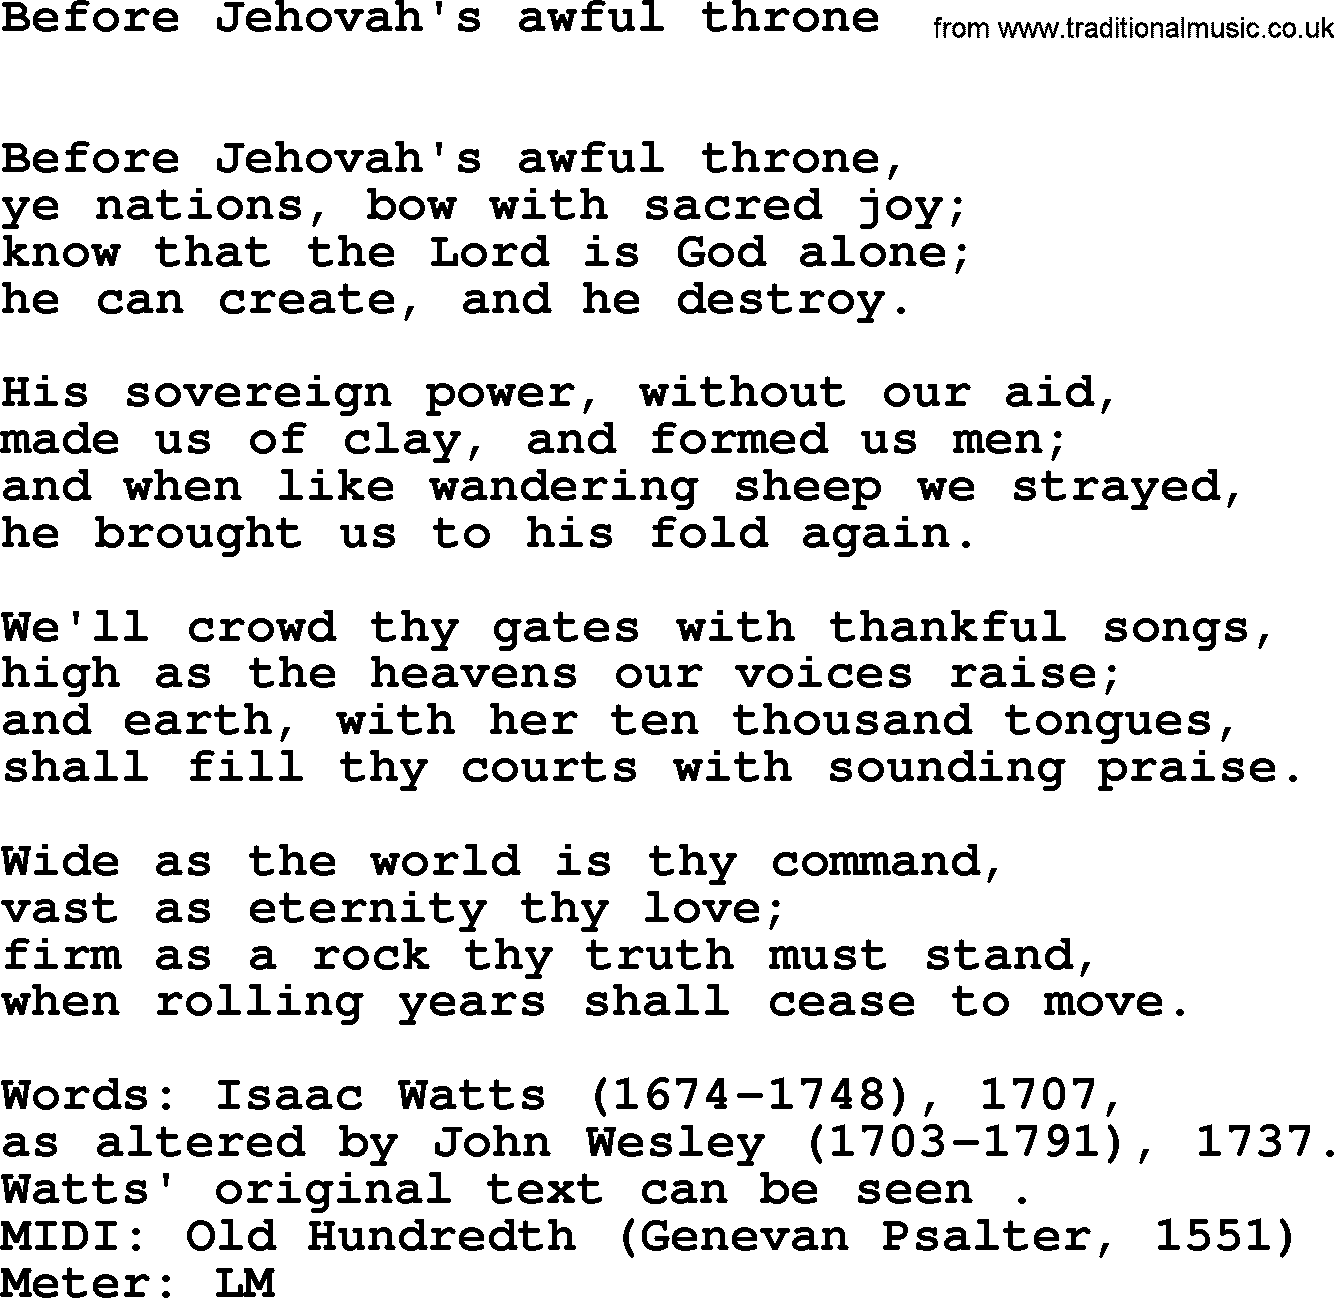 Book of Common Praise Hymn: Before Jehovah's Awful Throne.txt lyrics with midi music